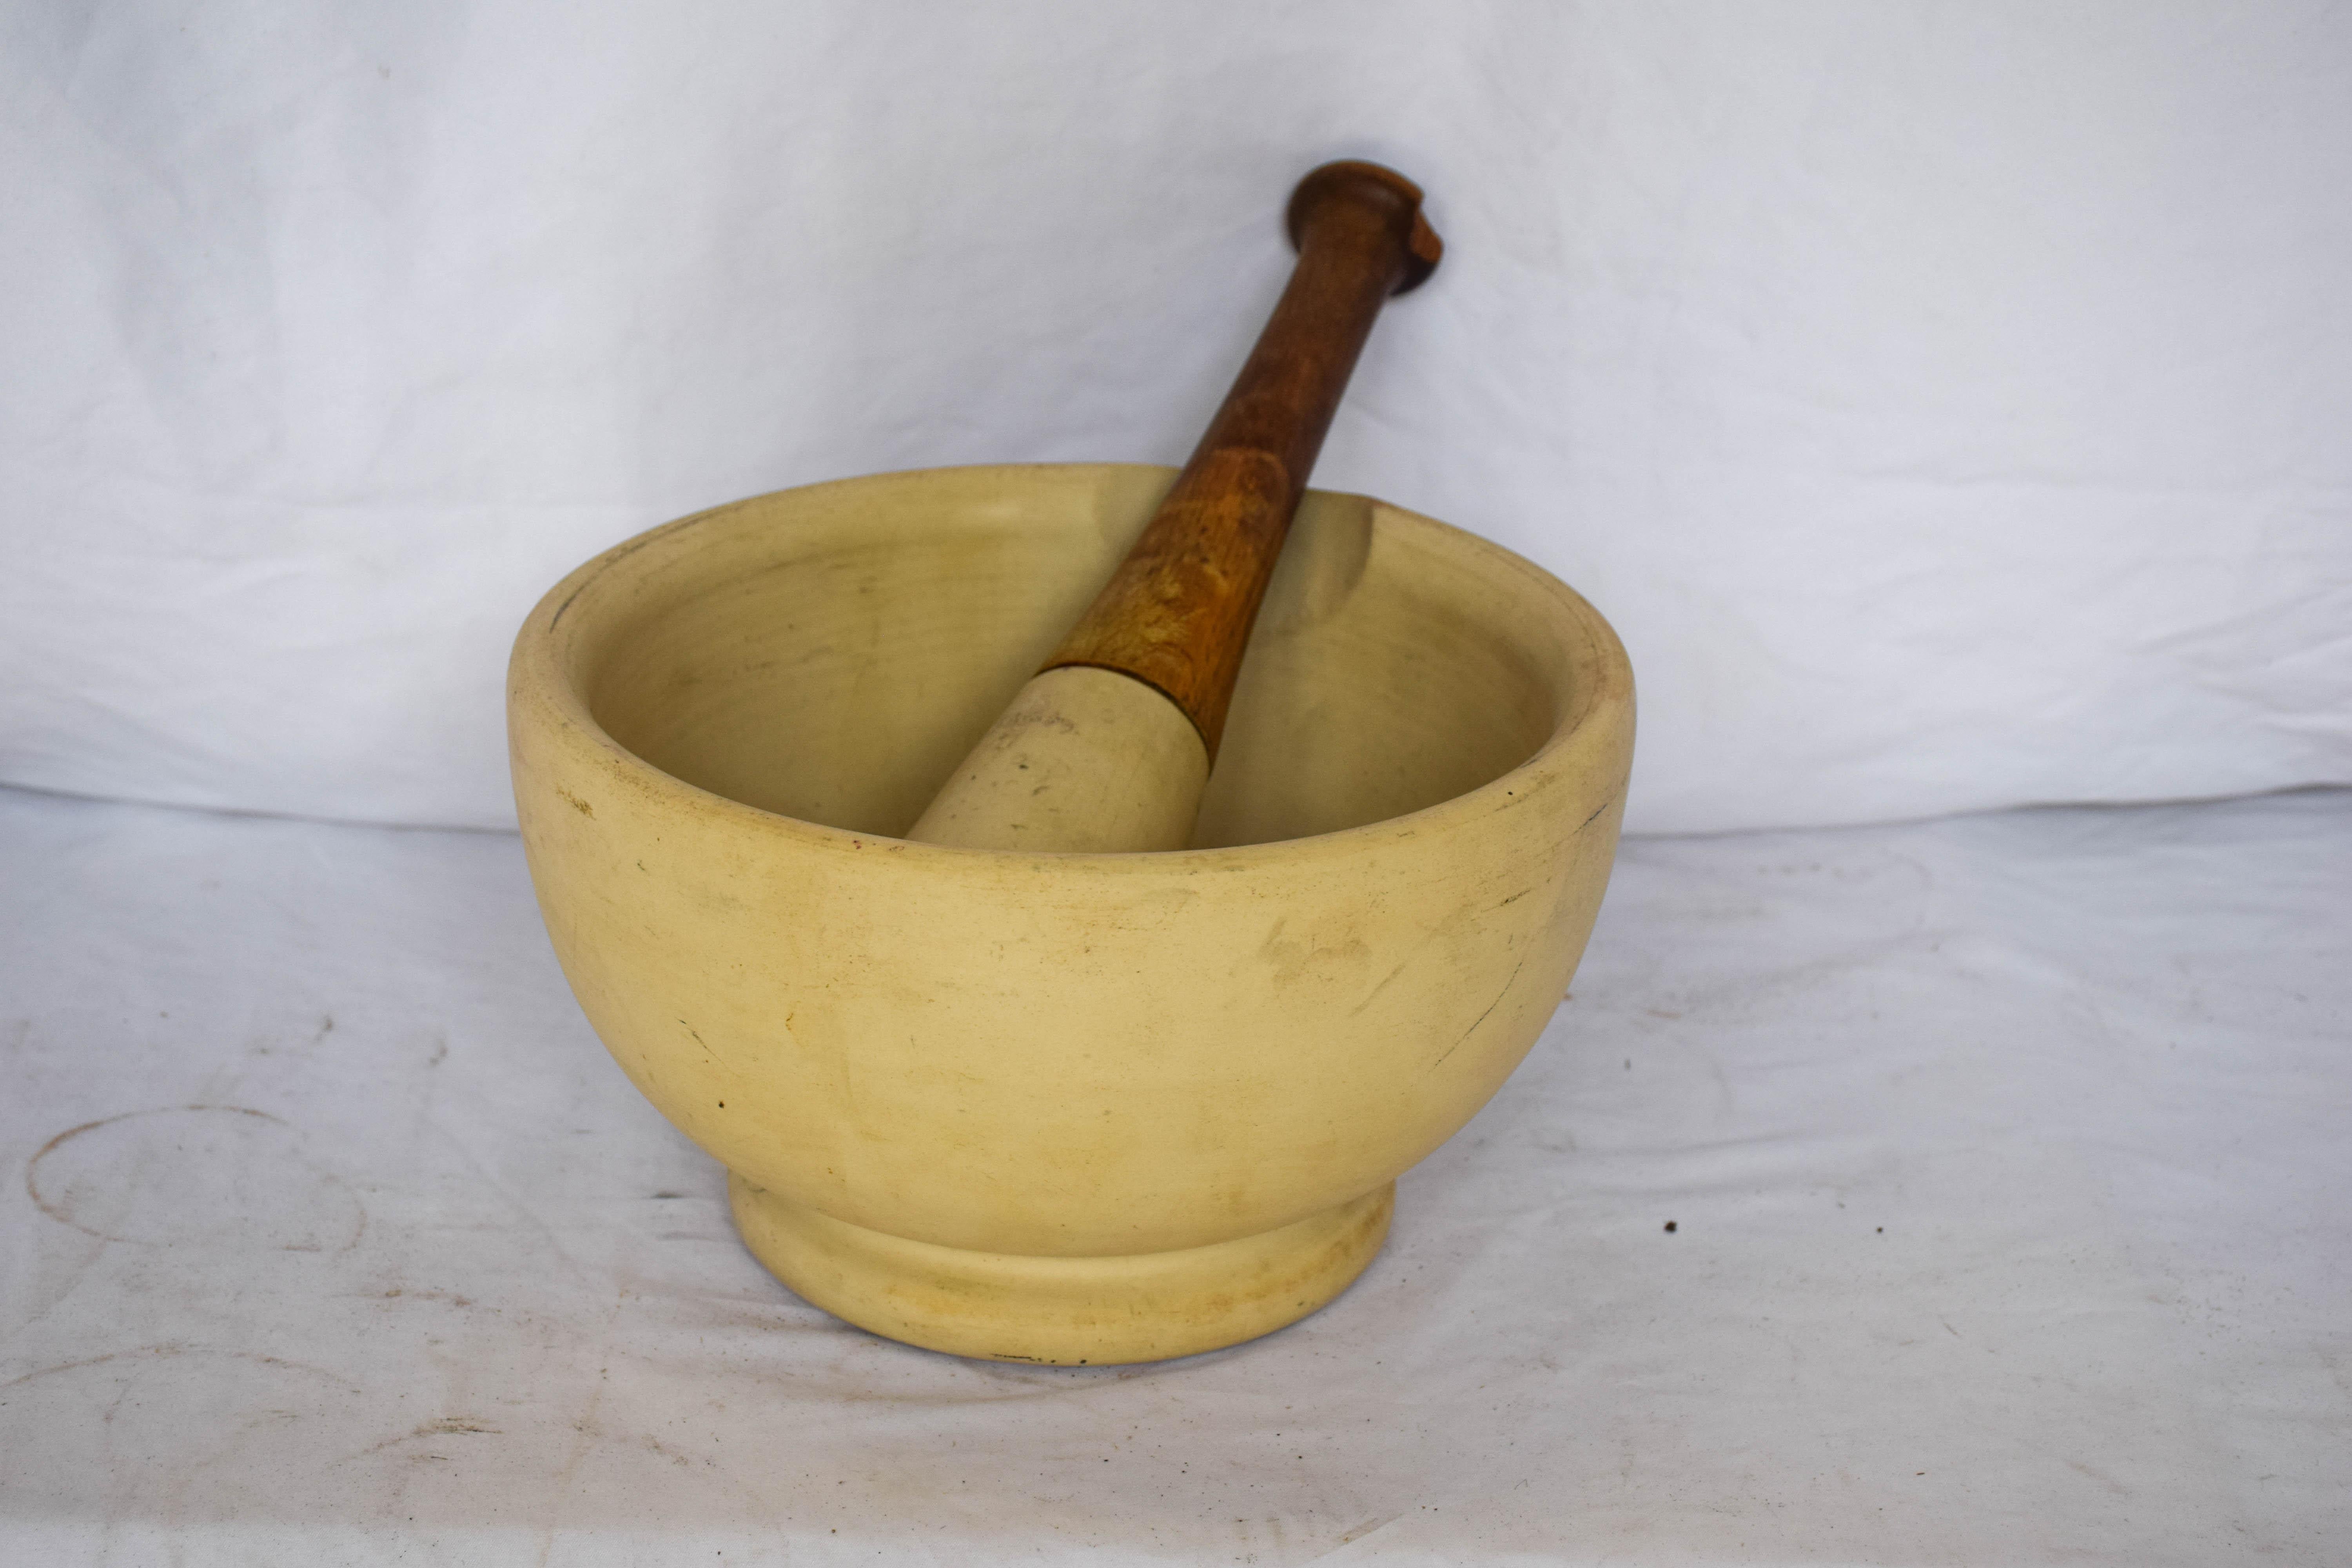 Nice Mortar and Pestle from England. Most likely from a Pharmacy used to mix pharmaceutical ingredients. It features a wooden handle on the Pestle and a pour spout on the Mortar. This set weighs a little more than 5 lbs.

Mortar dimensions: 11